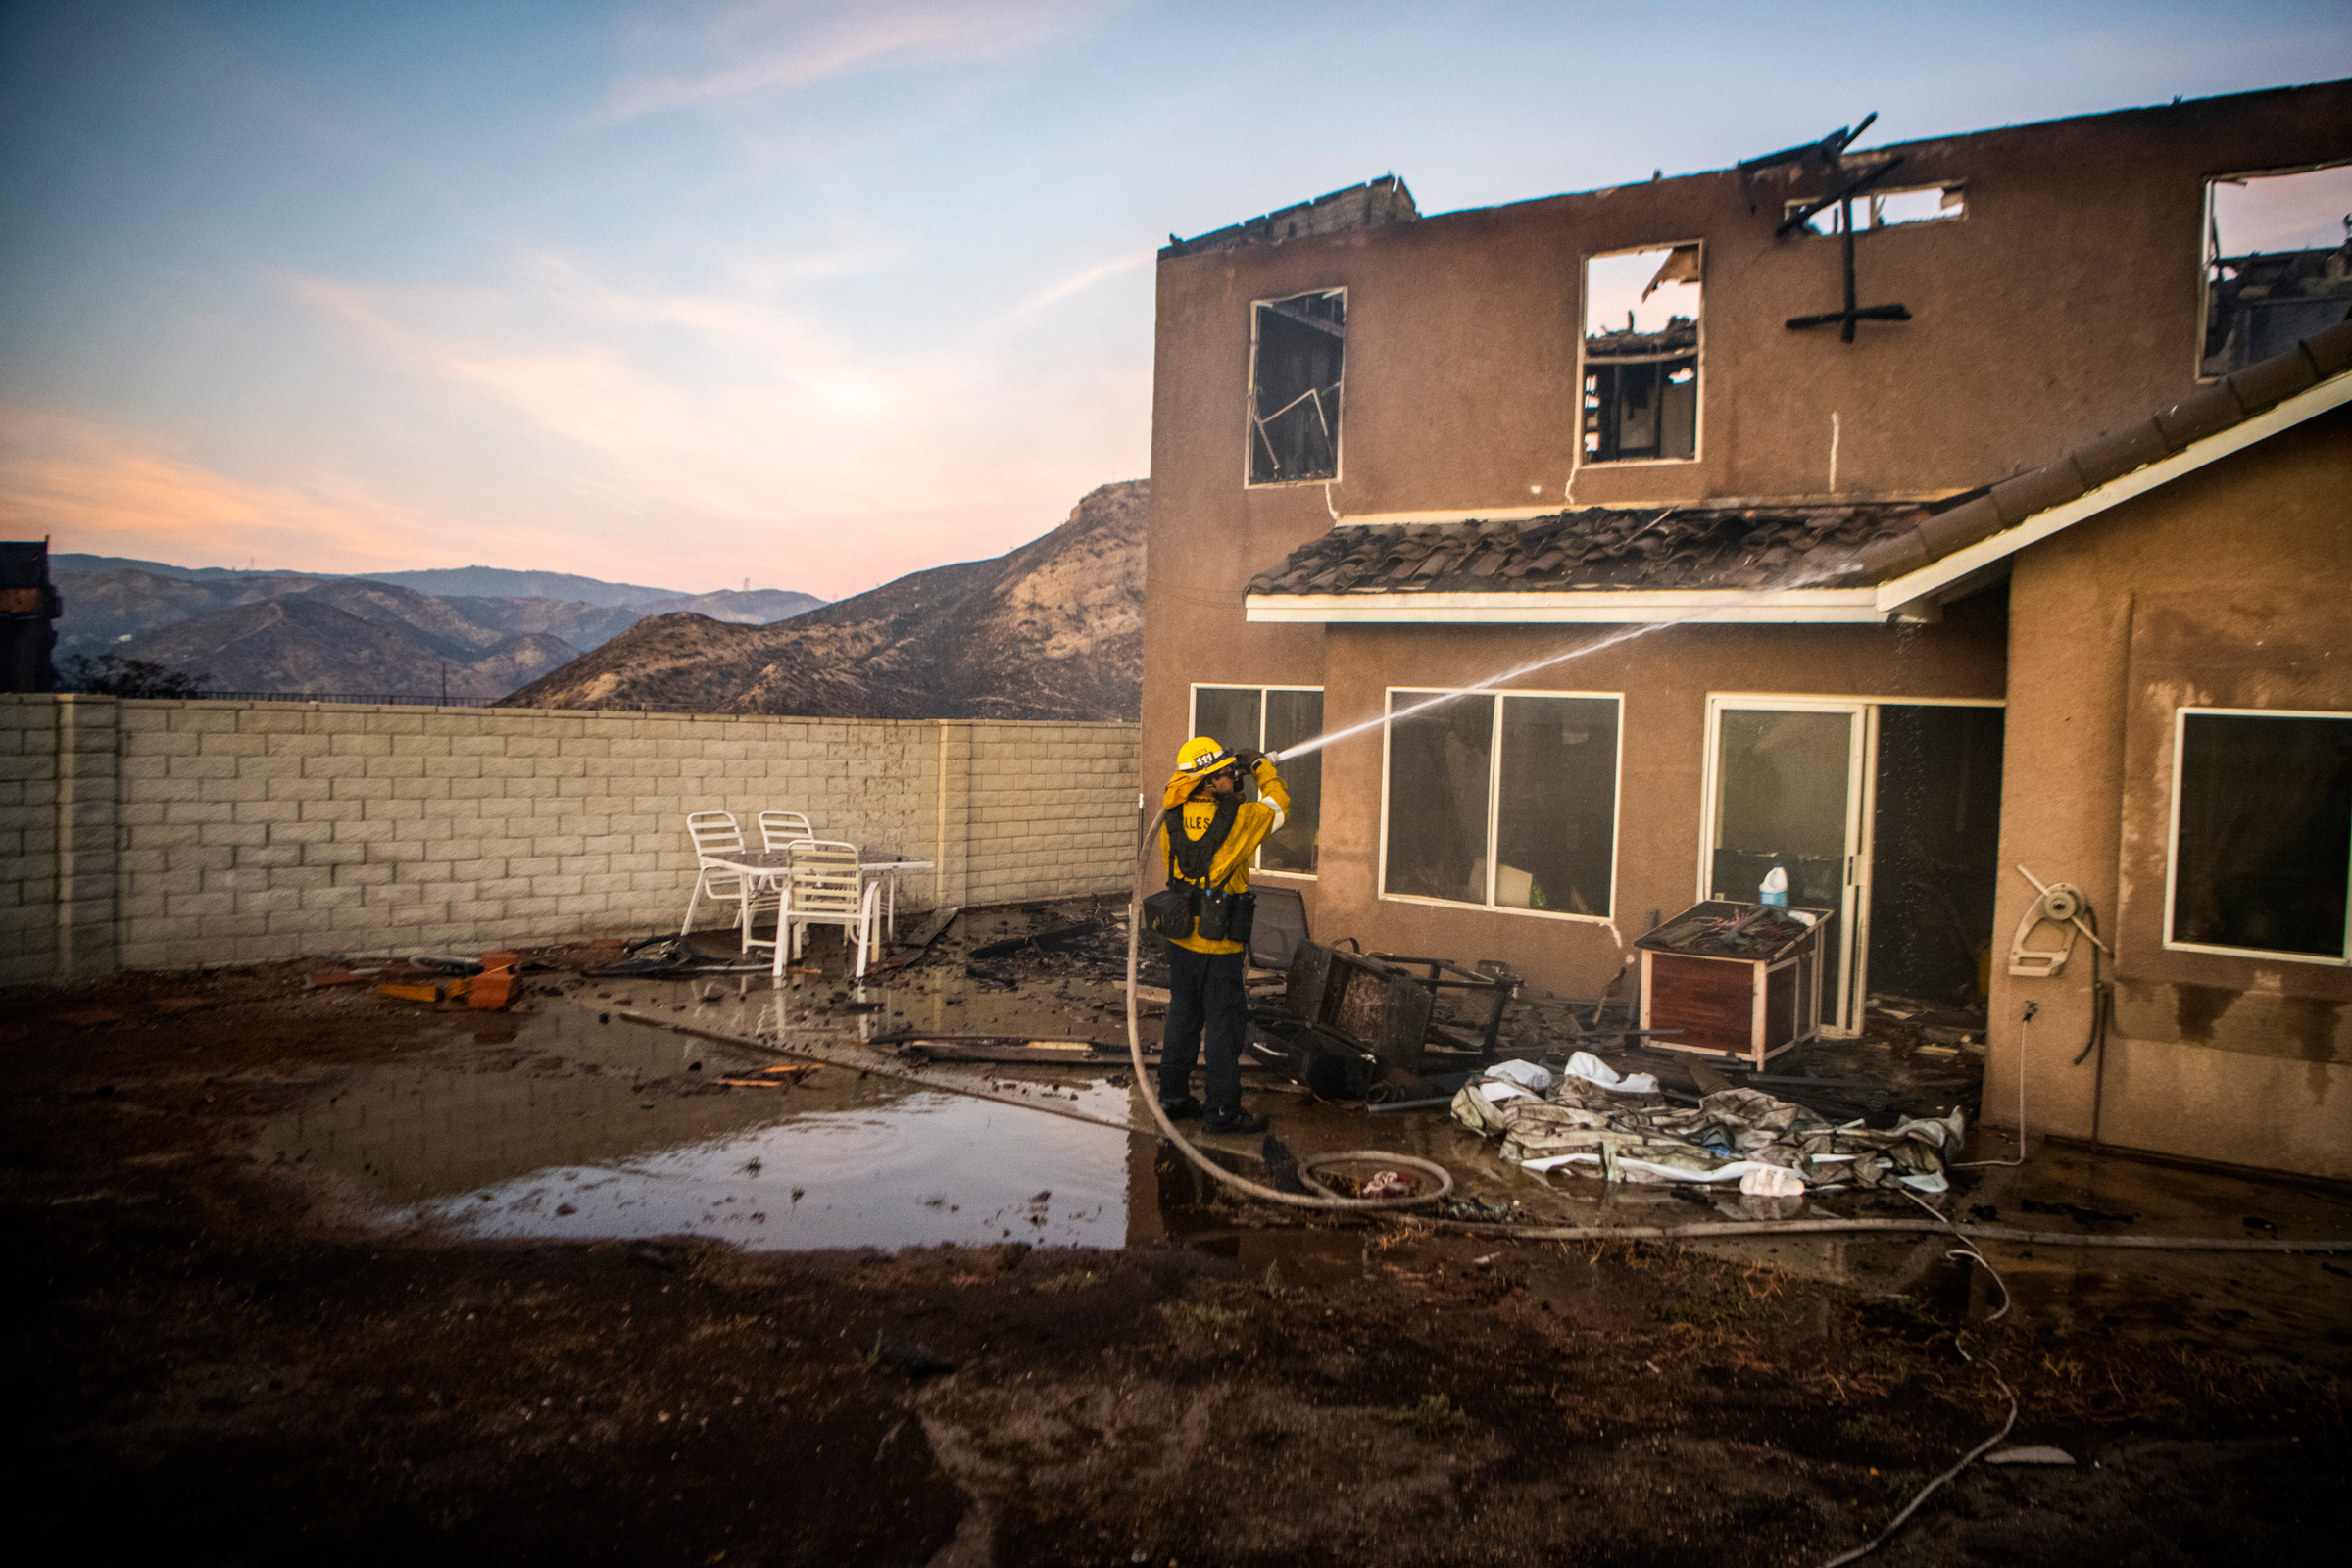 A firefighter hoses down a damaged house as the Tick Fire burns in the Santa Clarita, Calif., area on Oct. 24, 2019.